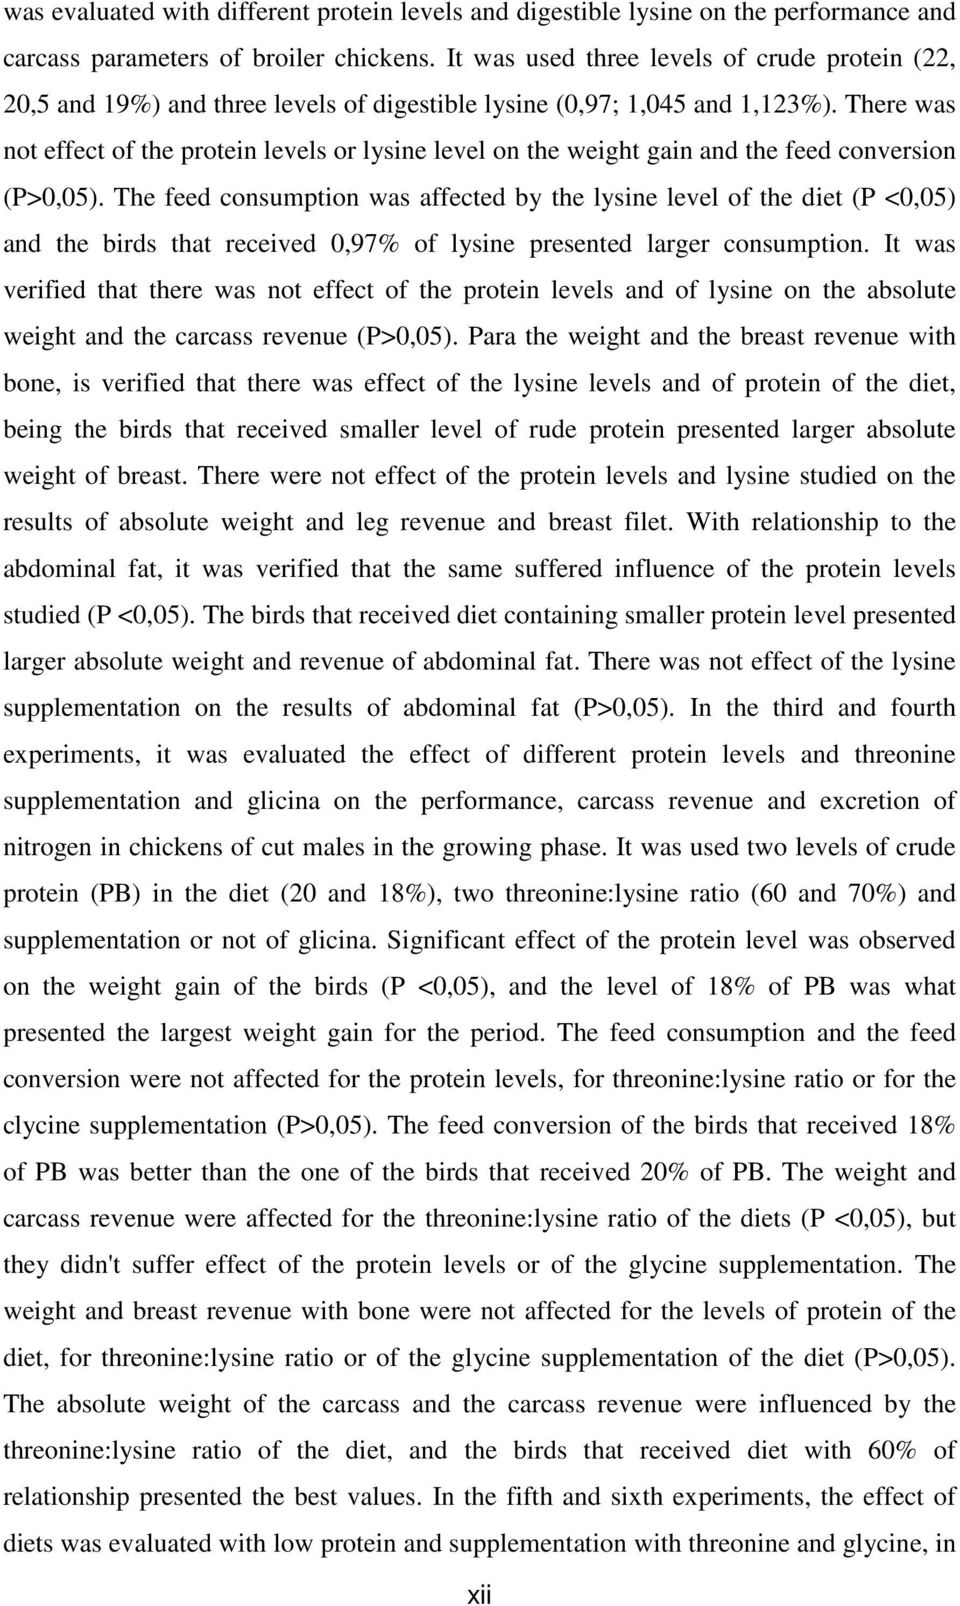 There was not effect of the protein levels or lysine level on the weight gain and the feed conversion (P>0,05).